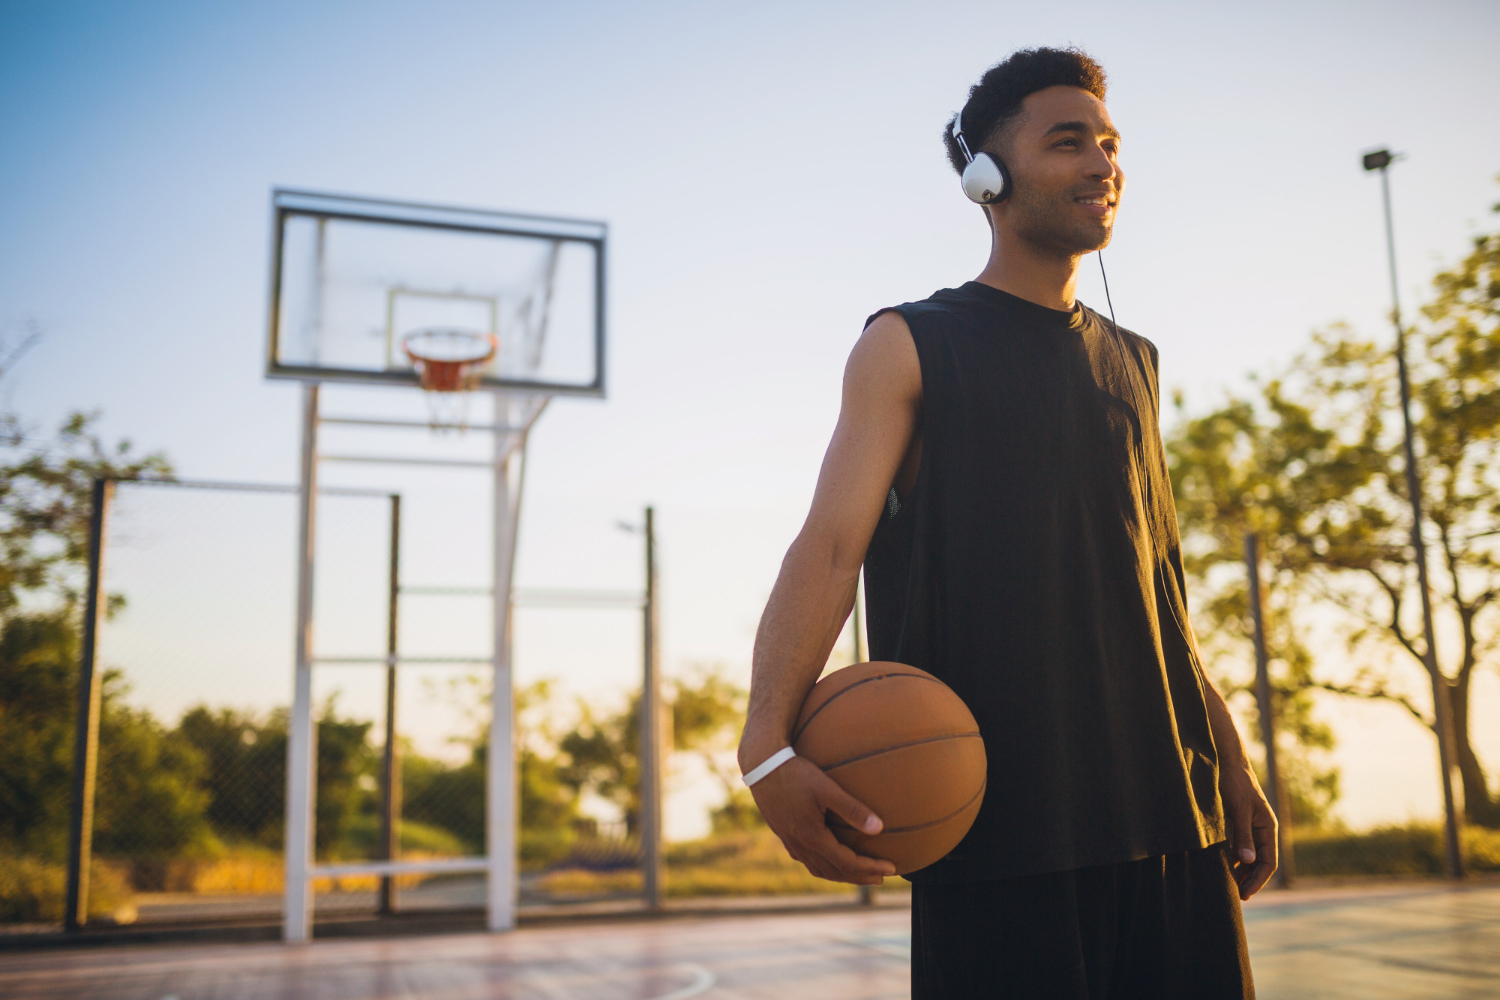 Person holding a basketball and listening to music